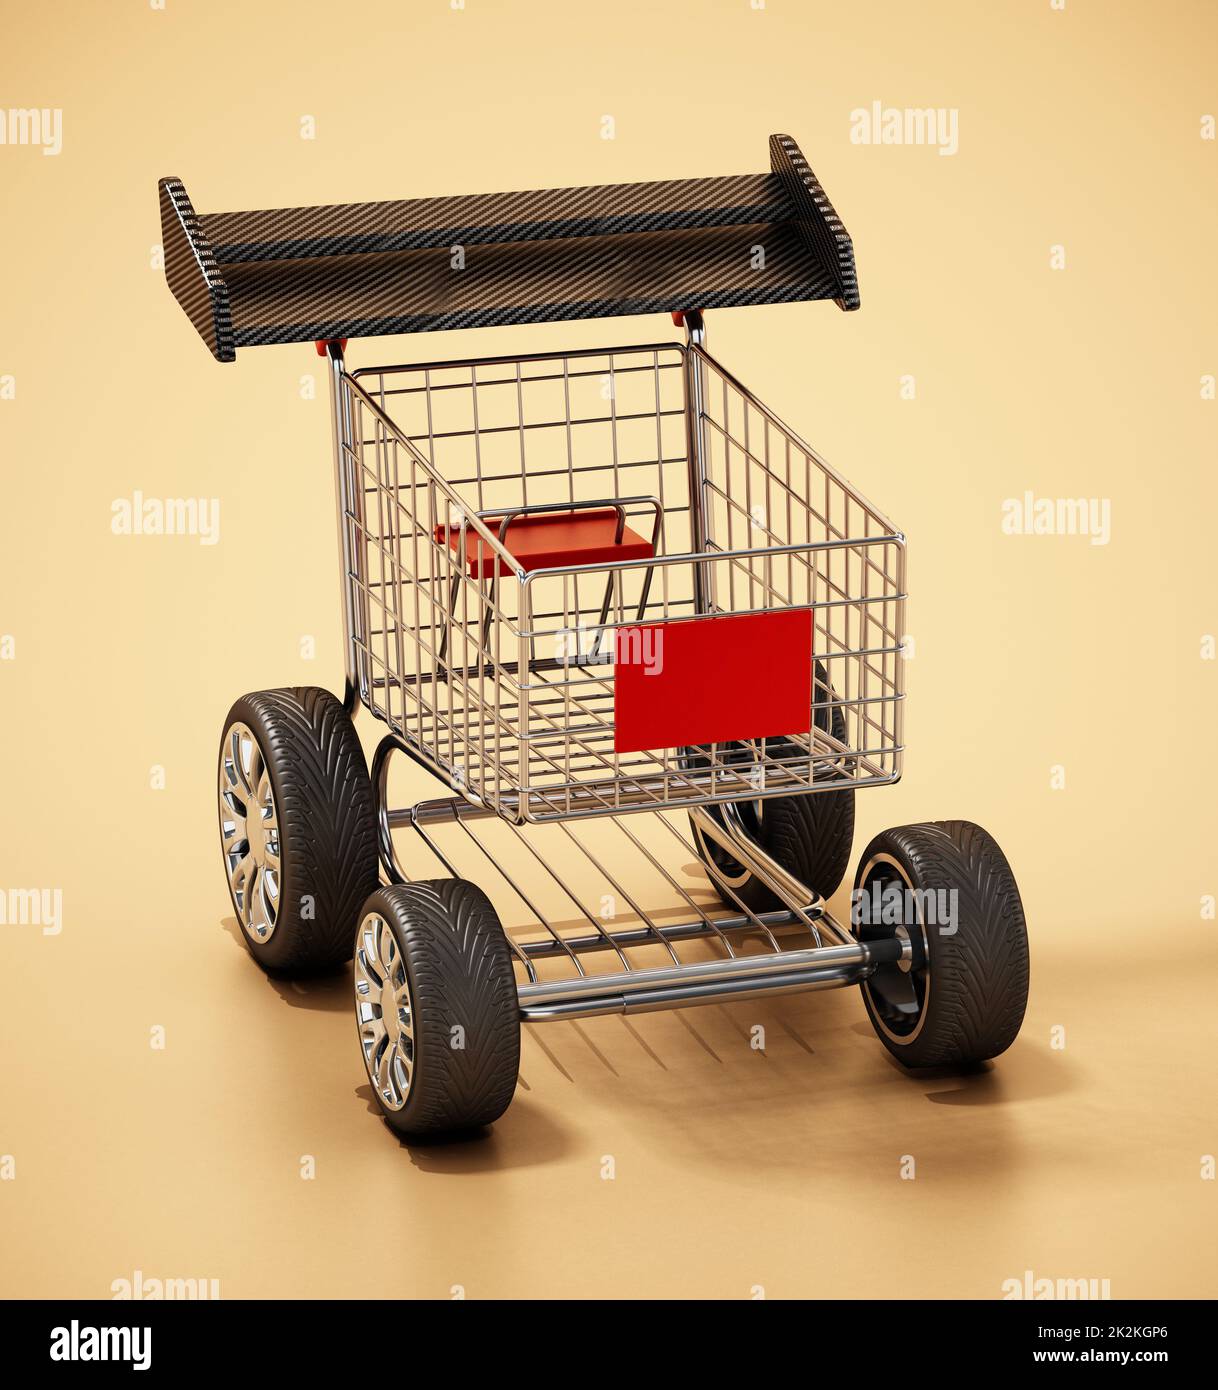 Shopping cart with sports tyres and a spoiler. 3D illustration Stock Photo